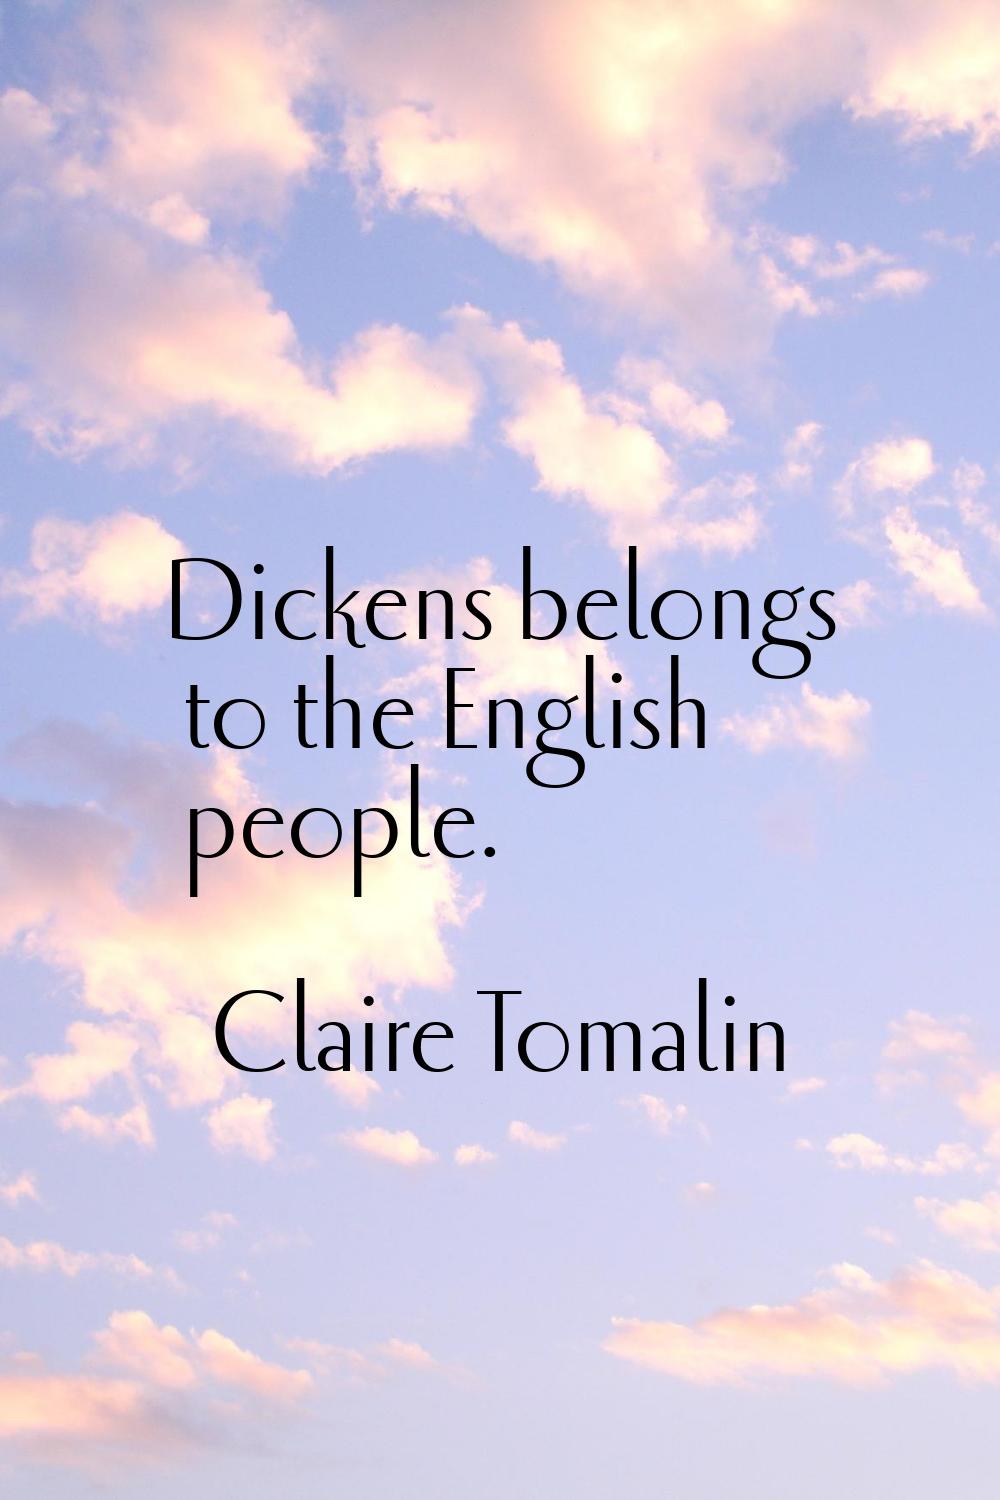 Dickens belongs to the English people.